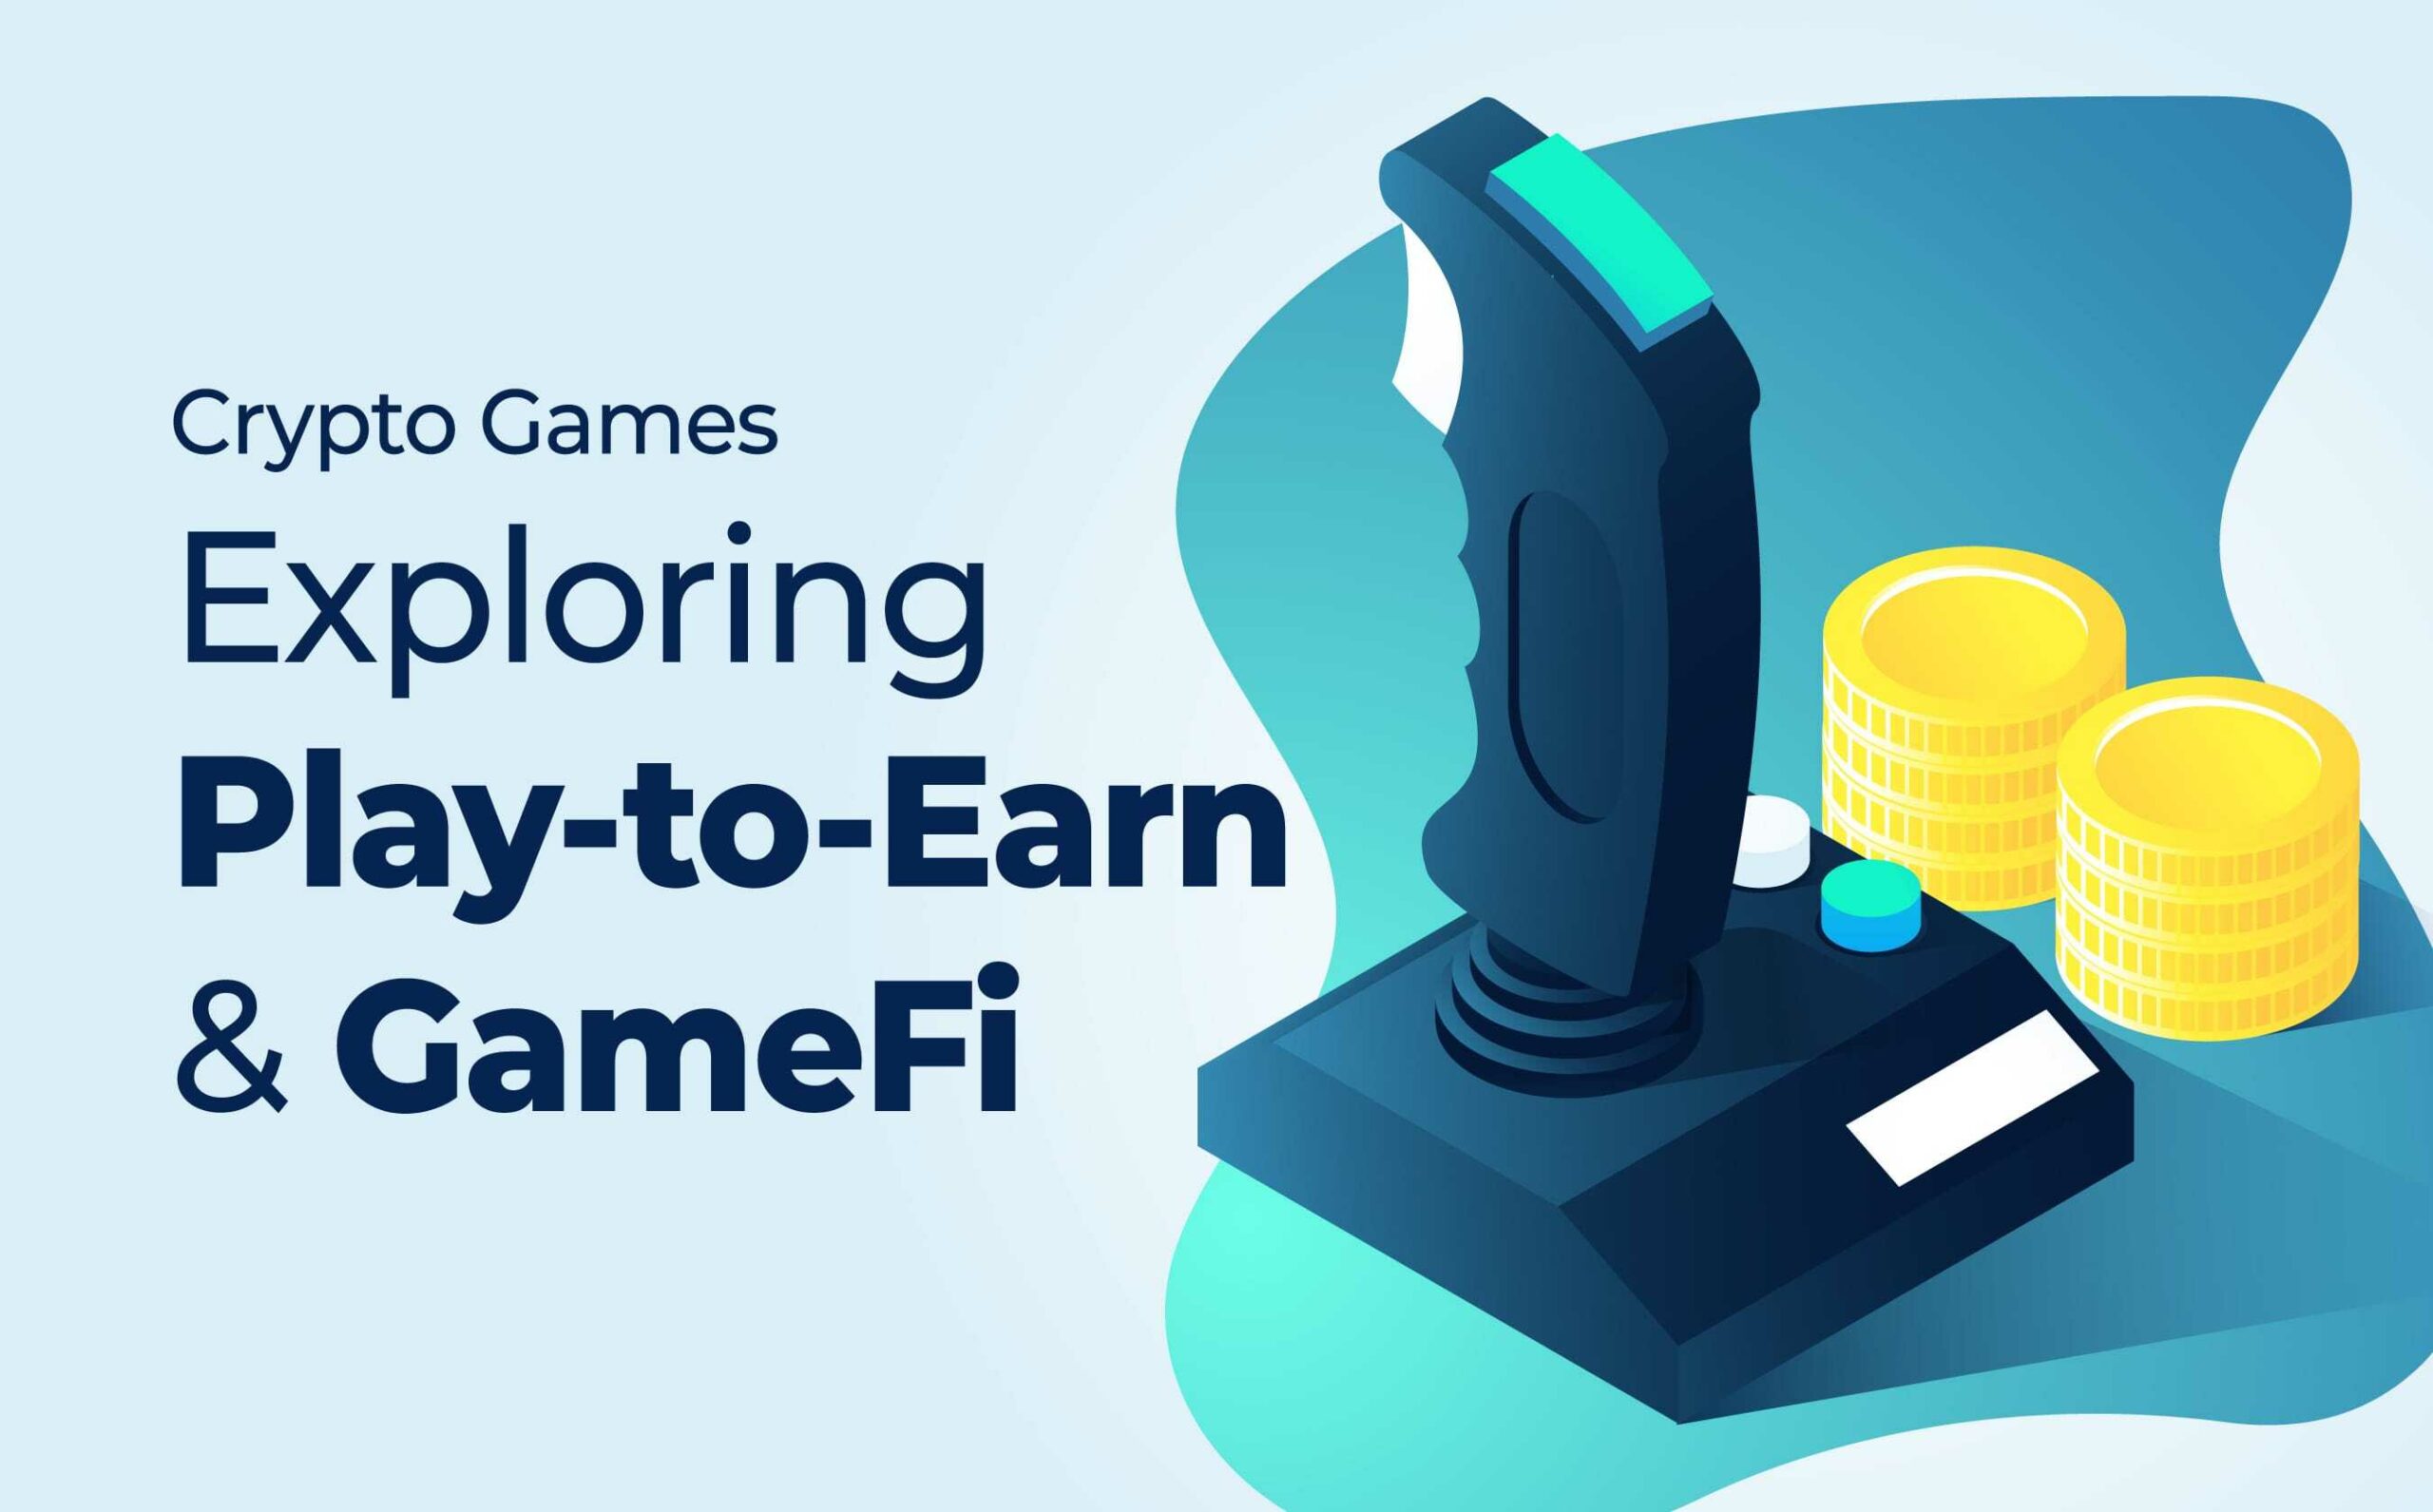 Explore play-to-earn games